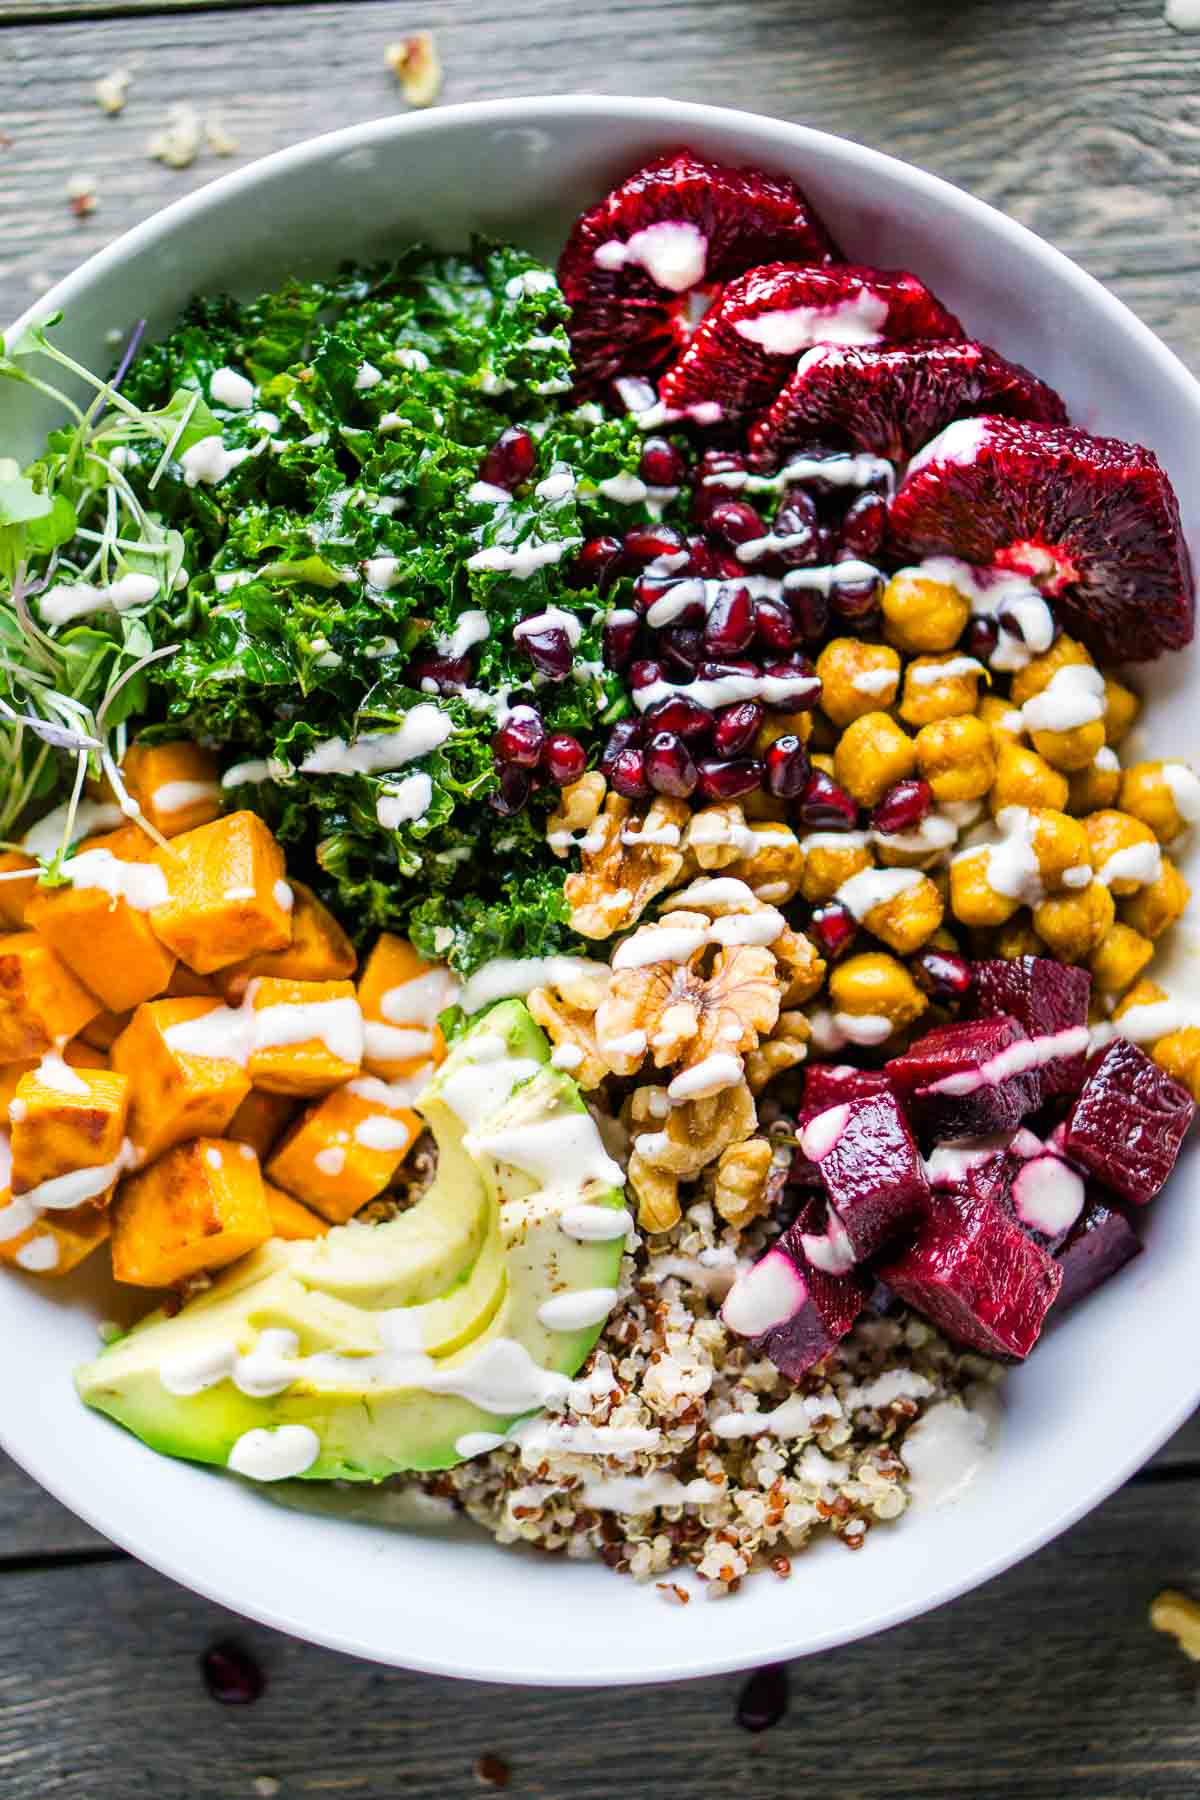 Buddha bowl ingredients consisting of kale, quinoa, diced sweet potatoes, chickpeas, blood oranges, diced beets, walnuts, microgreens, pomegranate arils, and avocado with drizzled Buddha bowl sauce in white bowl